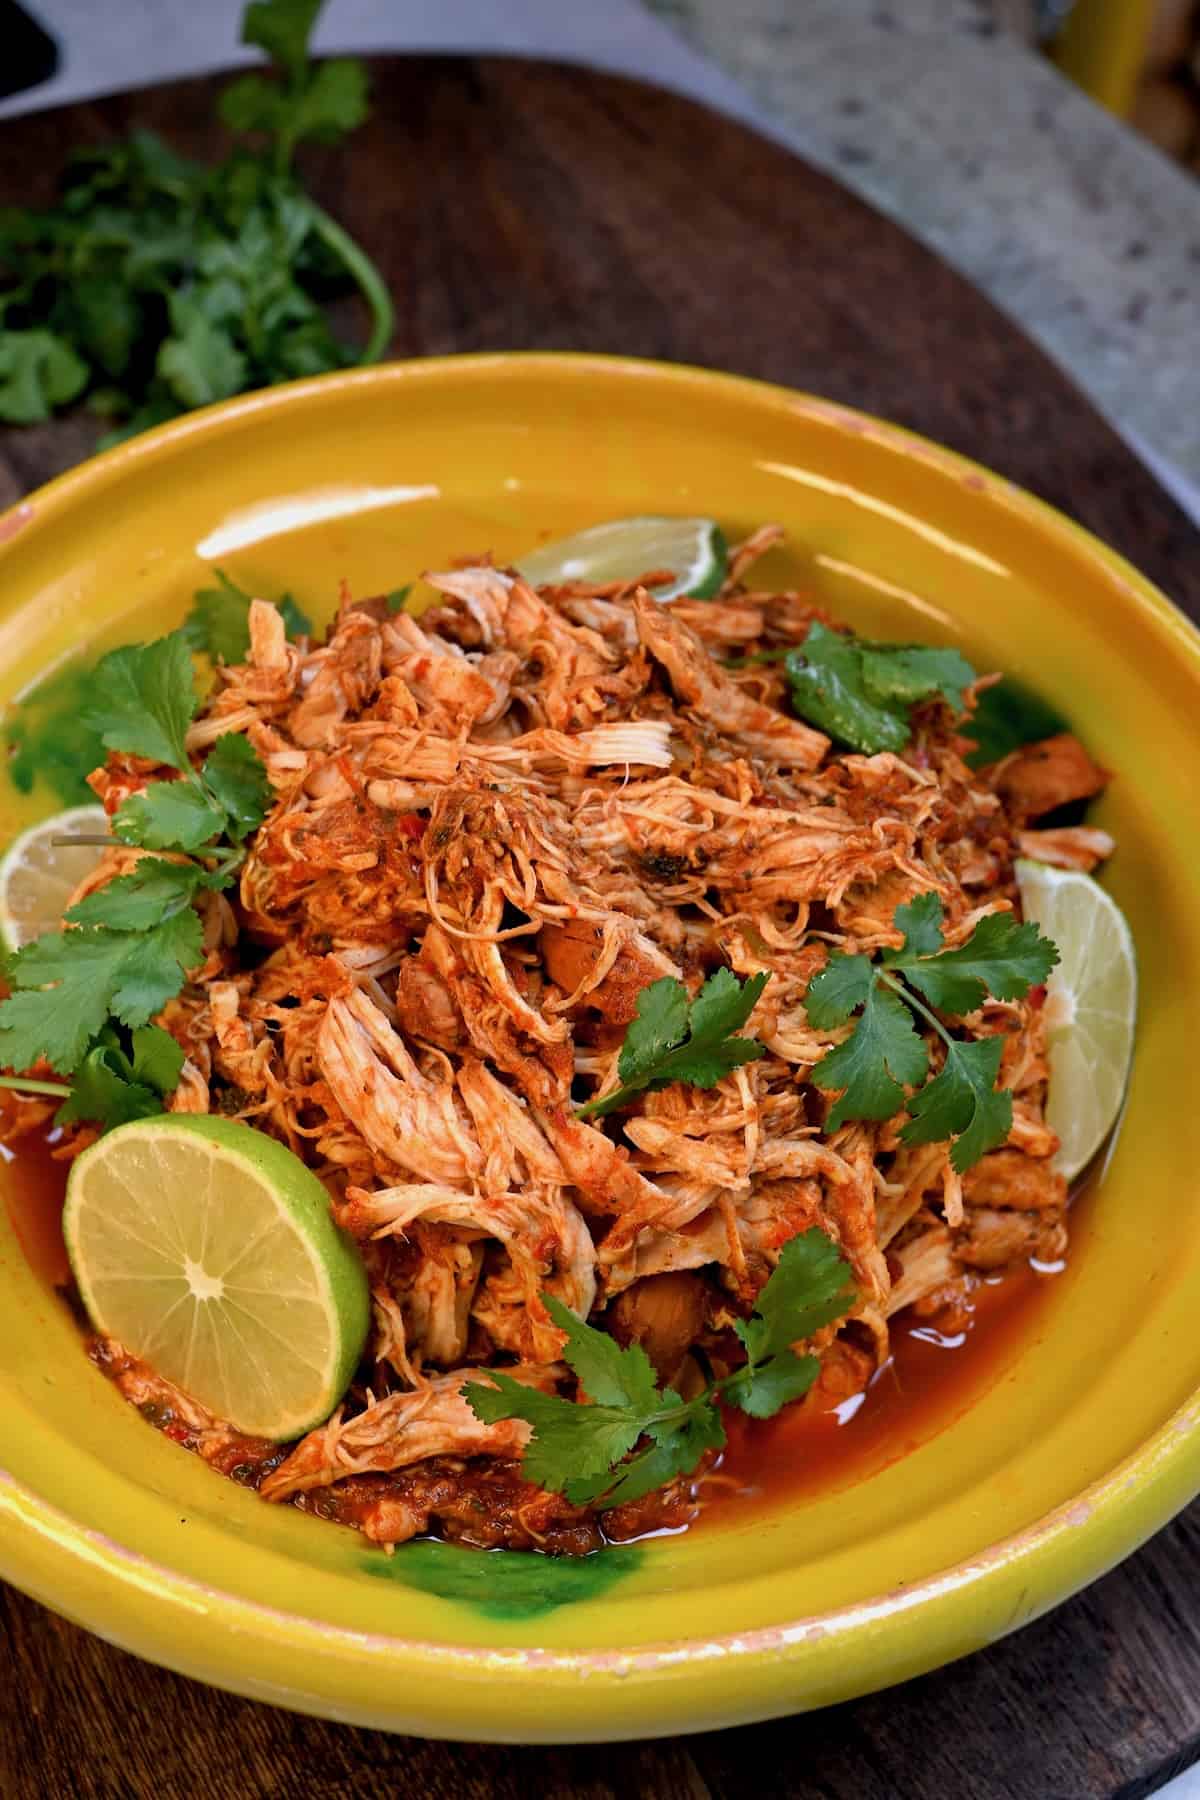 Shredded chicken served with cilantro and lime